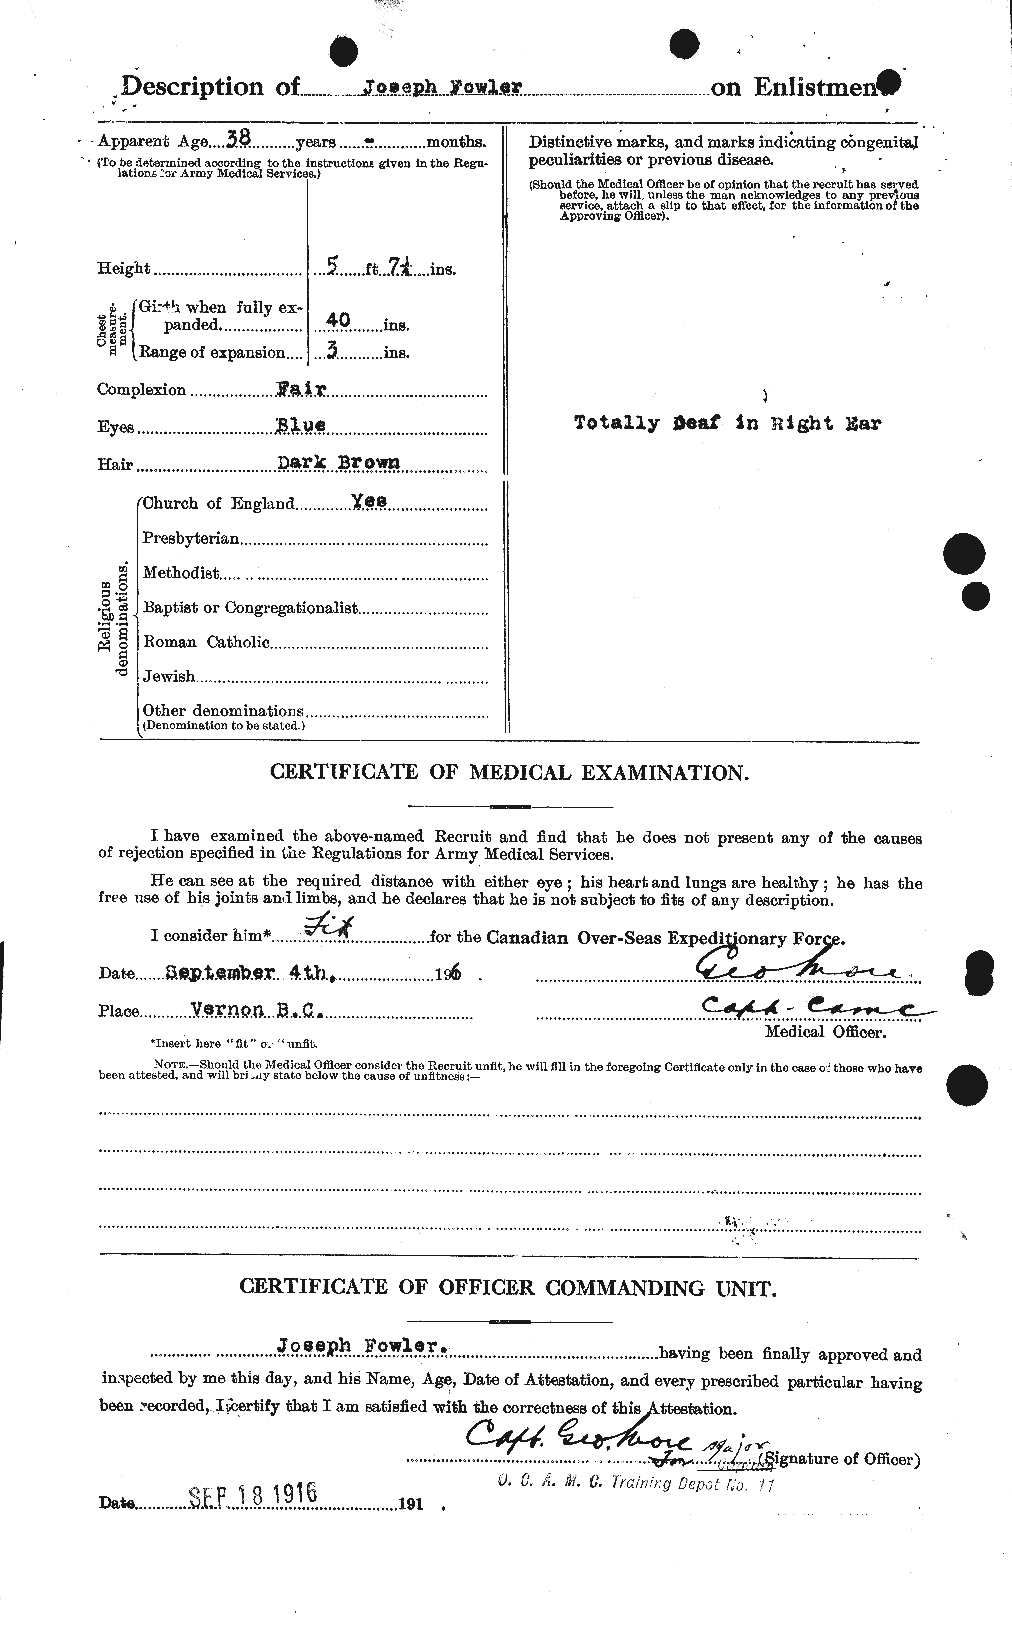 Personnel Records of the First World War - CEF 333120b